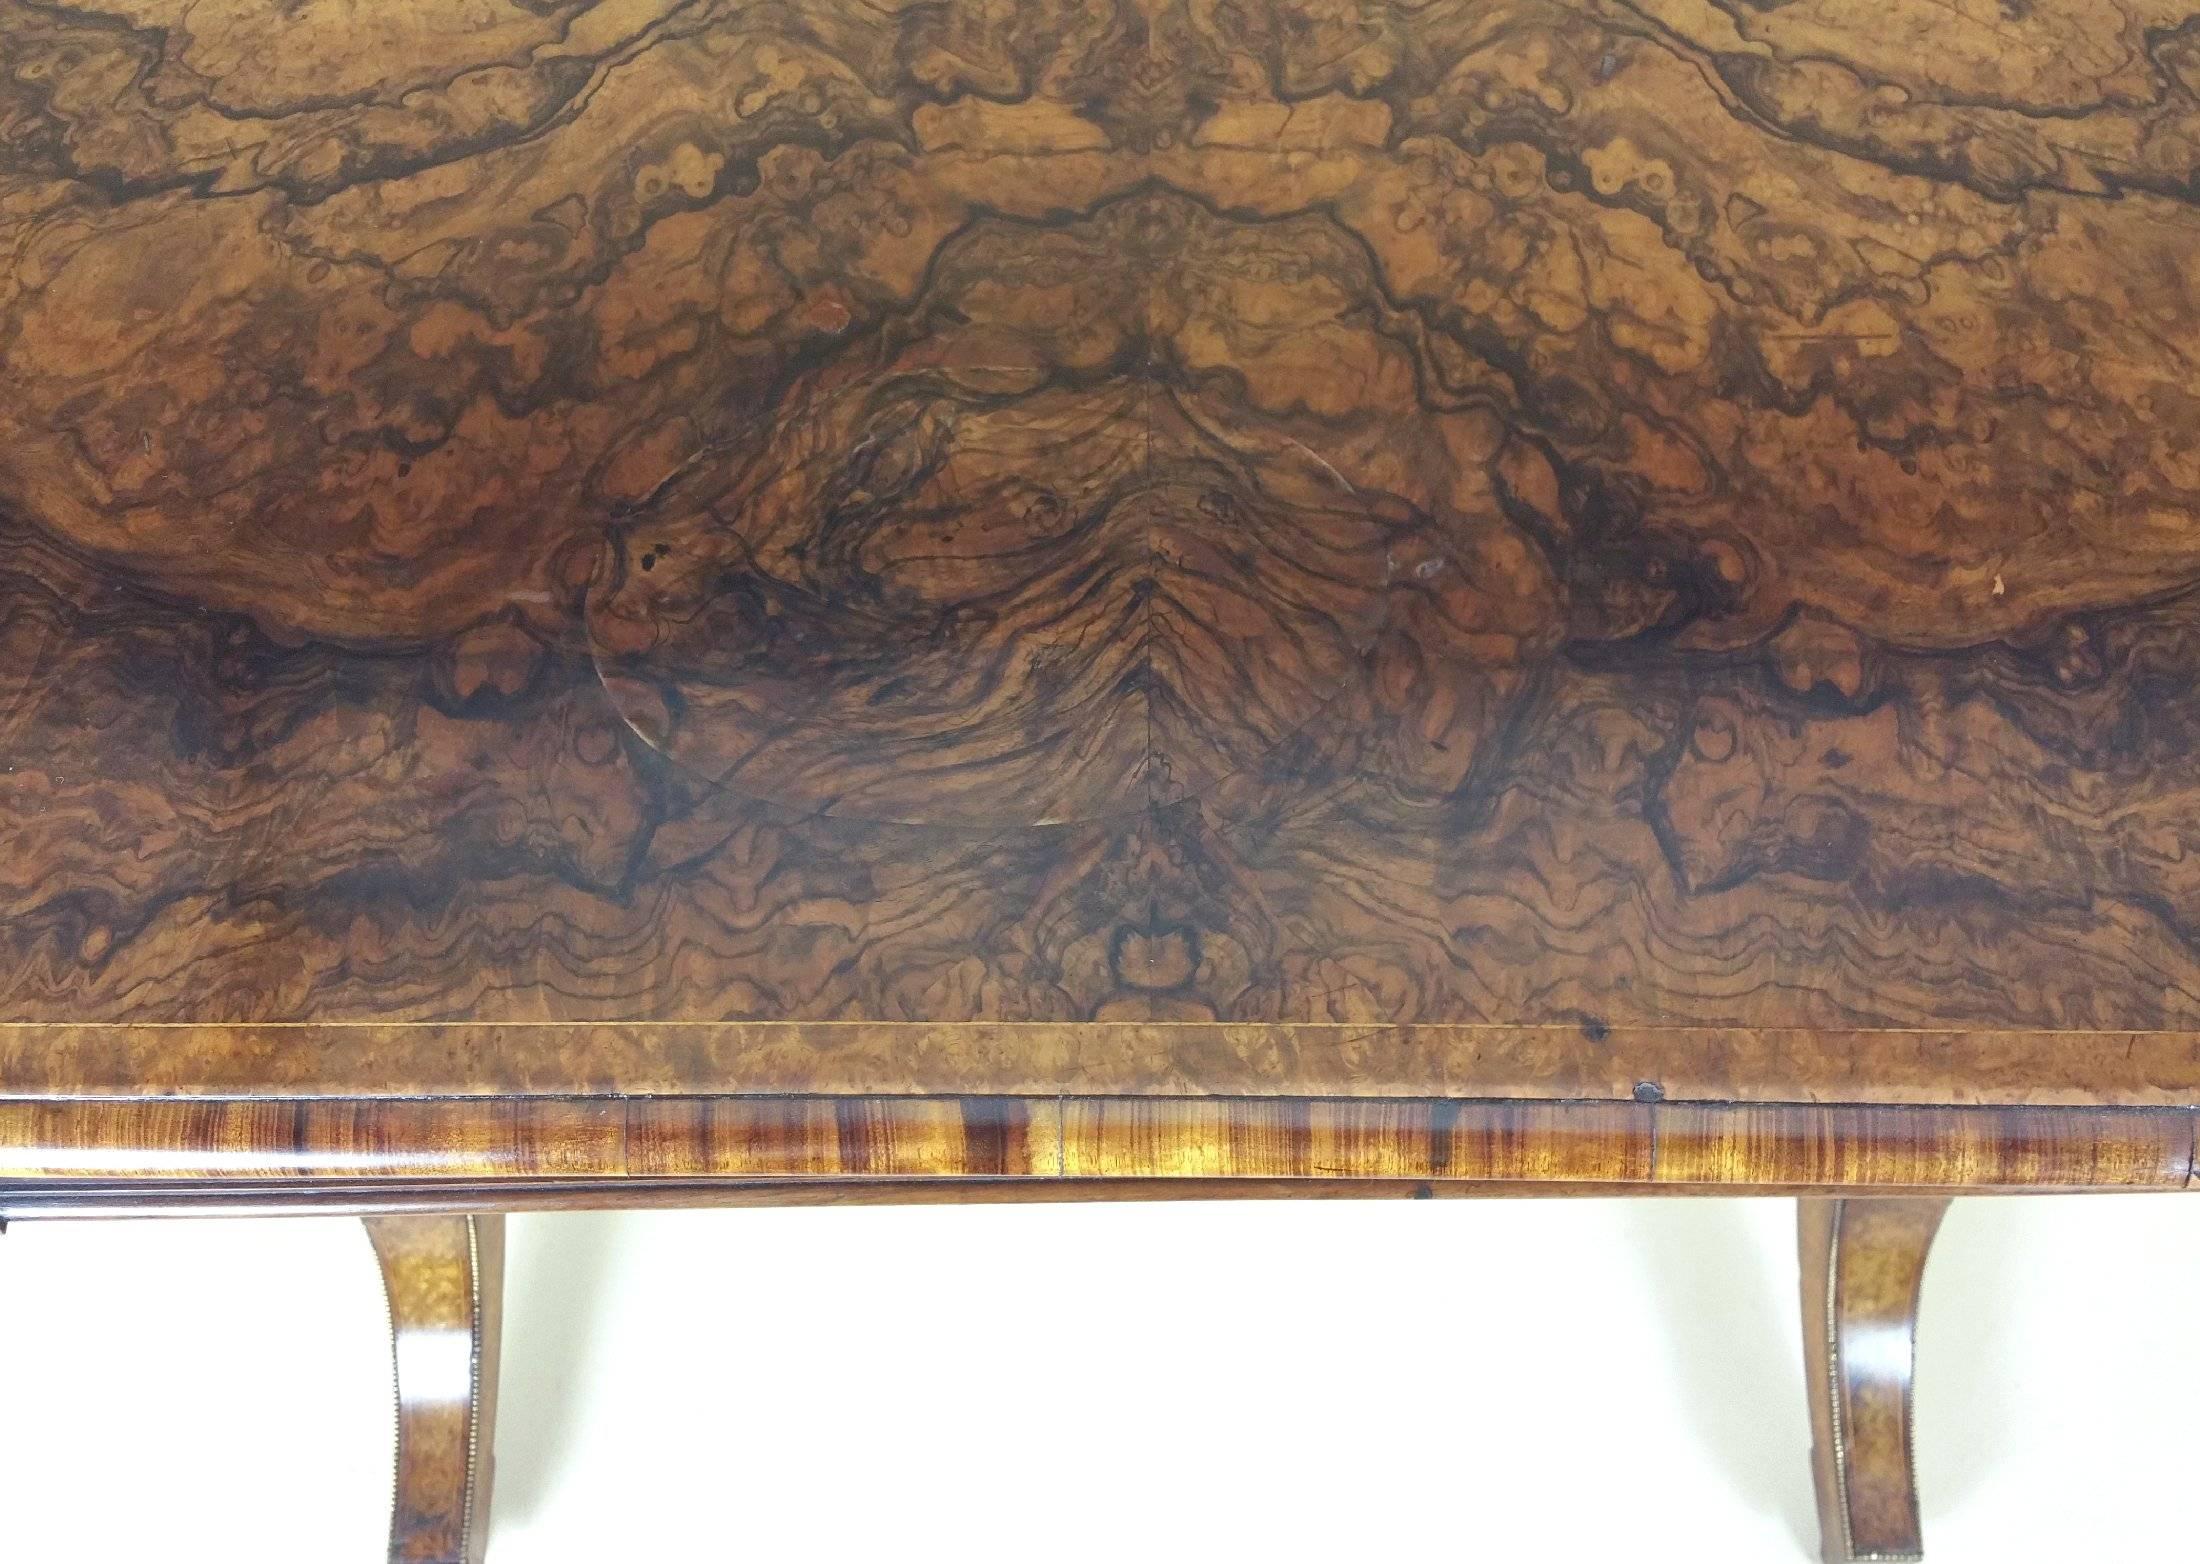 Great Britain (UK) 19th C. Figured Walnut Fold Over Card Table by Lamb of Manchester